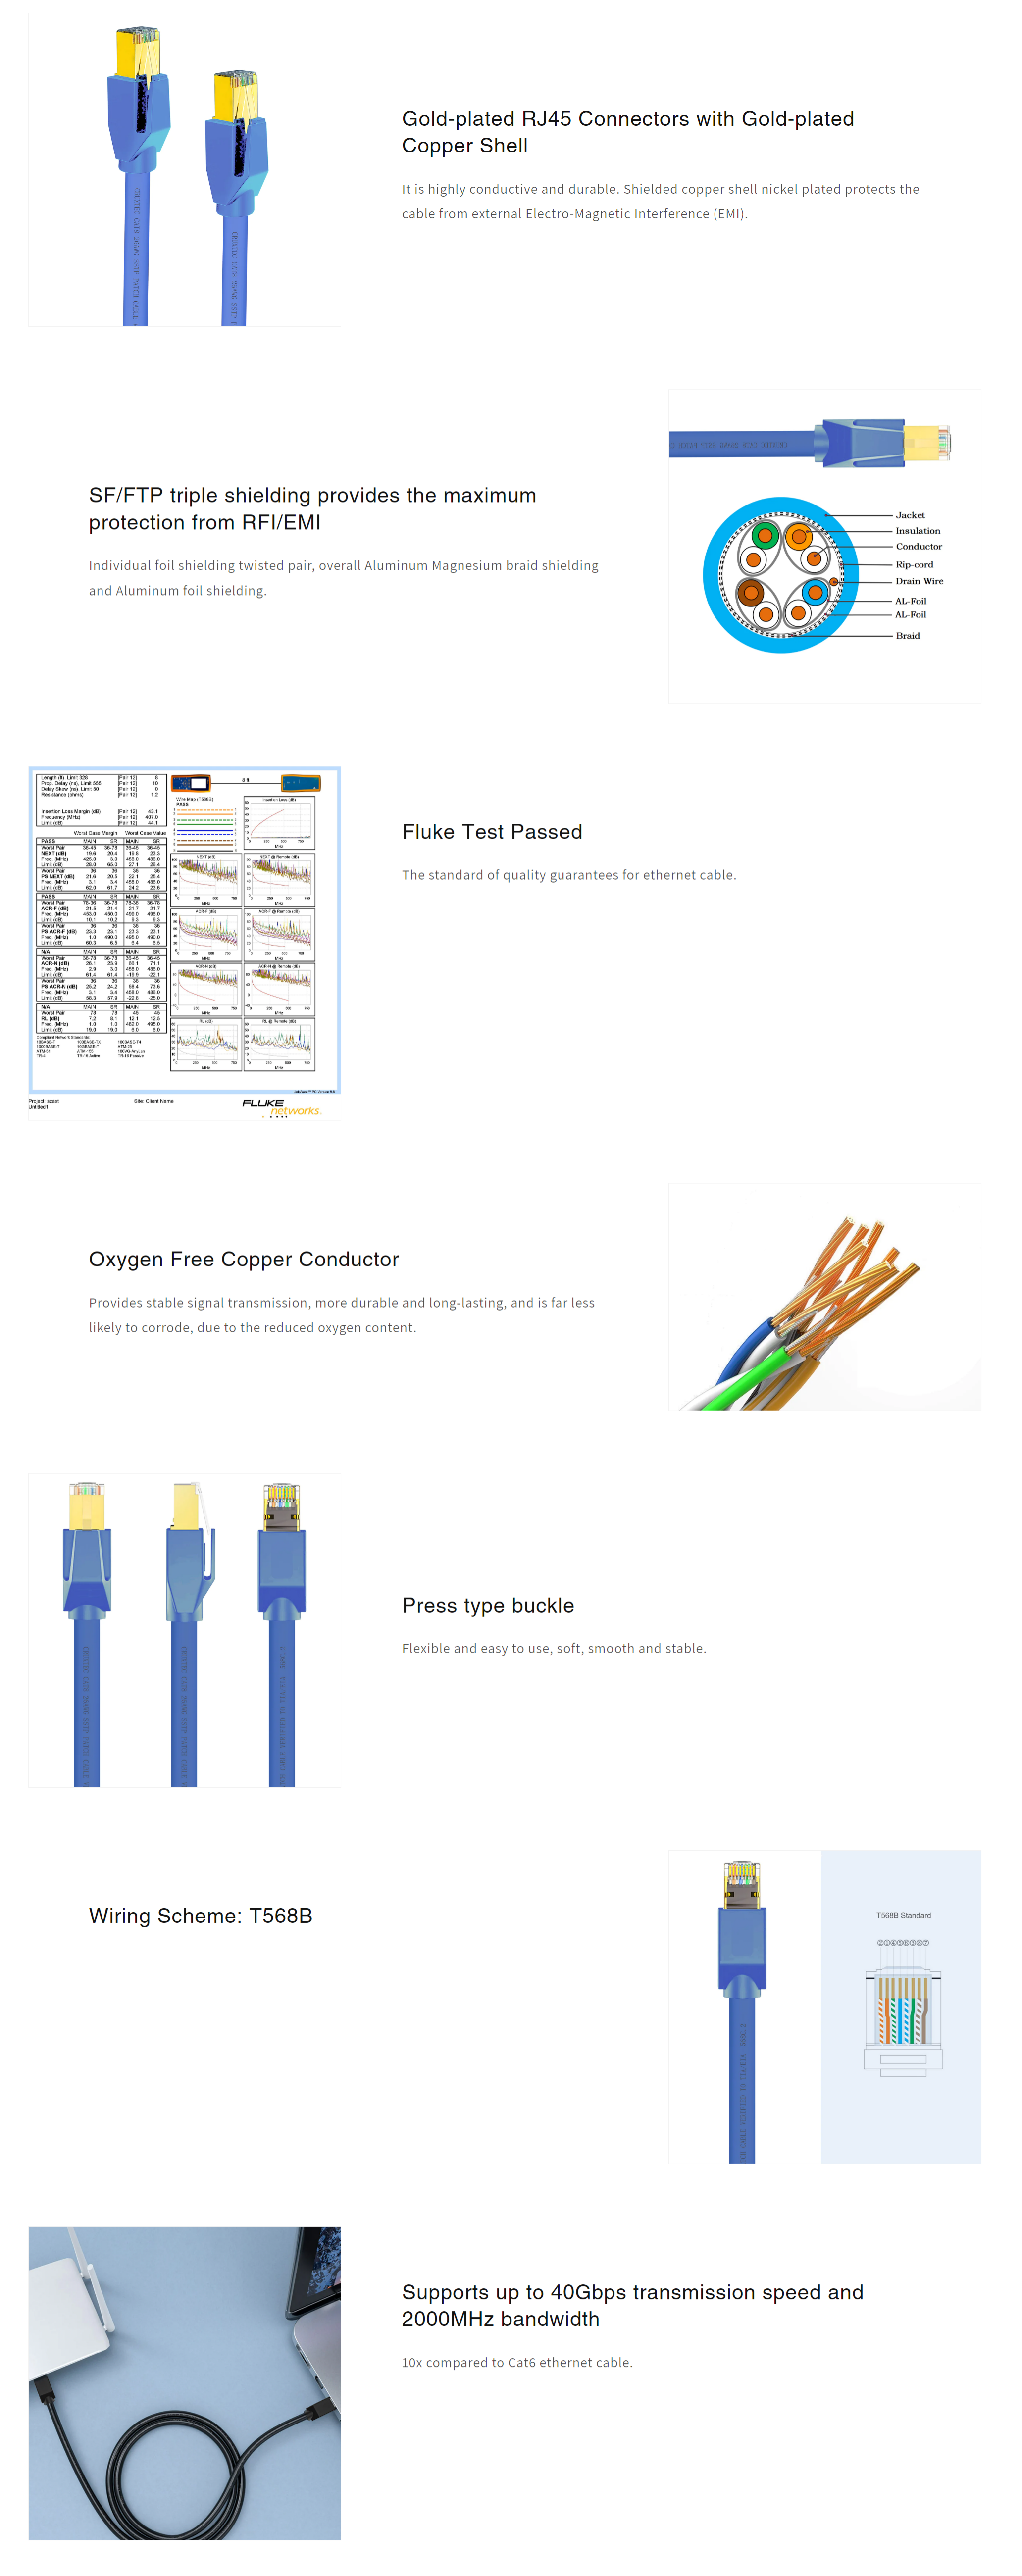 A large marketing image providing additional information about the product Cruxtec CAT8 20m 40GbE SF/FTP Triple Shielding Ethernet Cable Blue - Additional alt info not provided